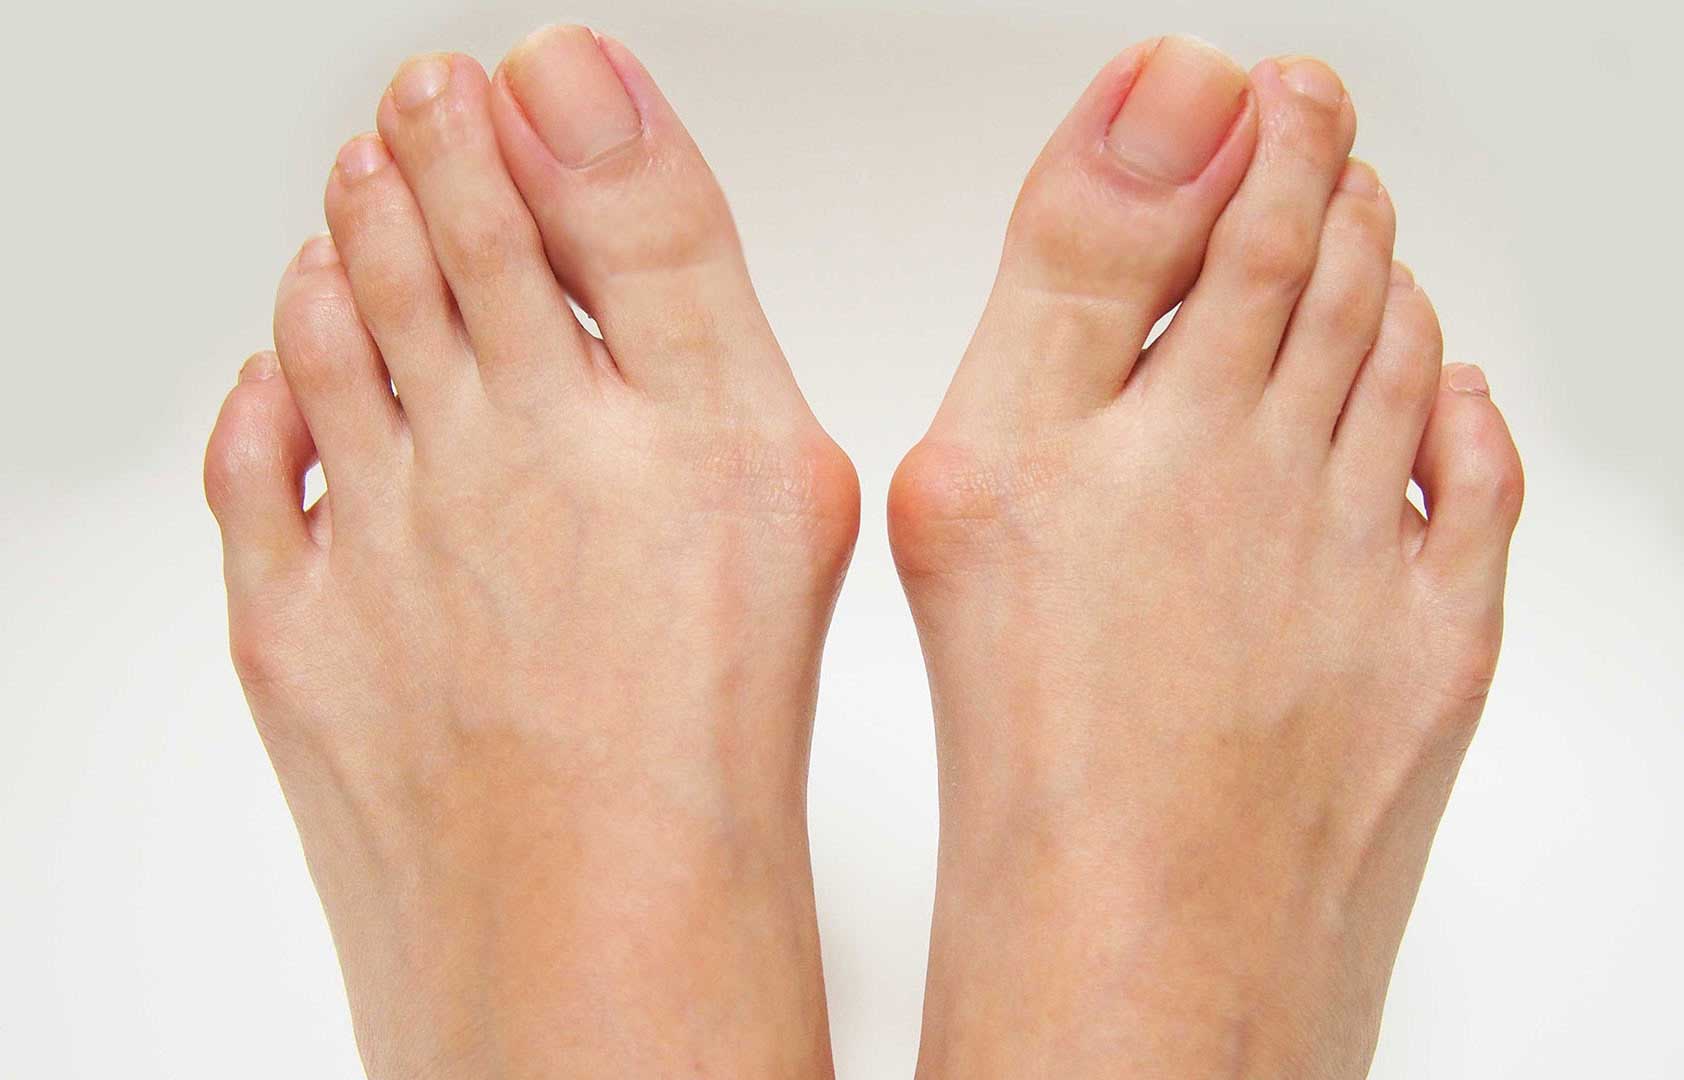 What are Bunions? What are its Symptoms, Causes and Treatment?